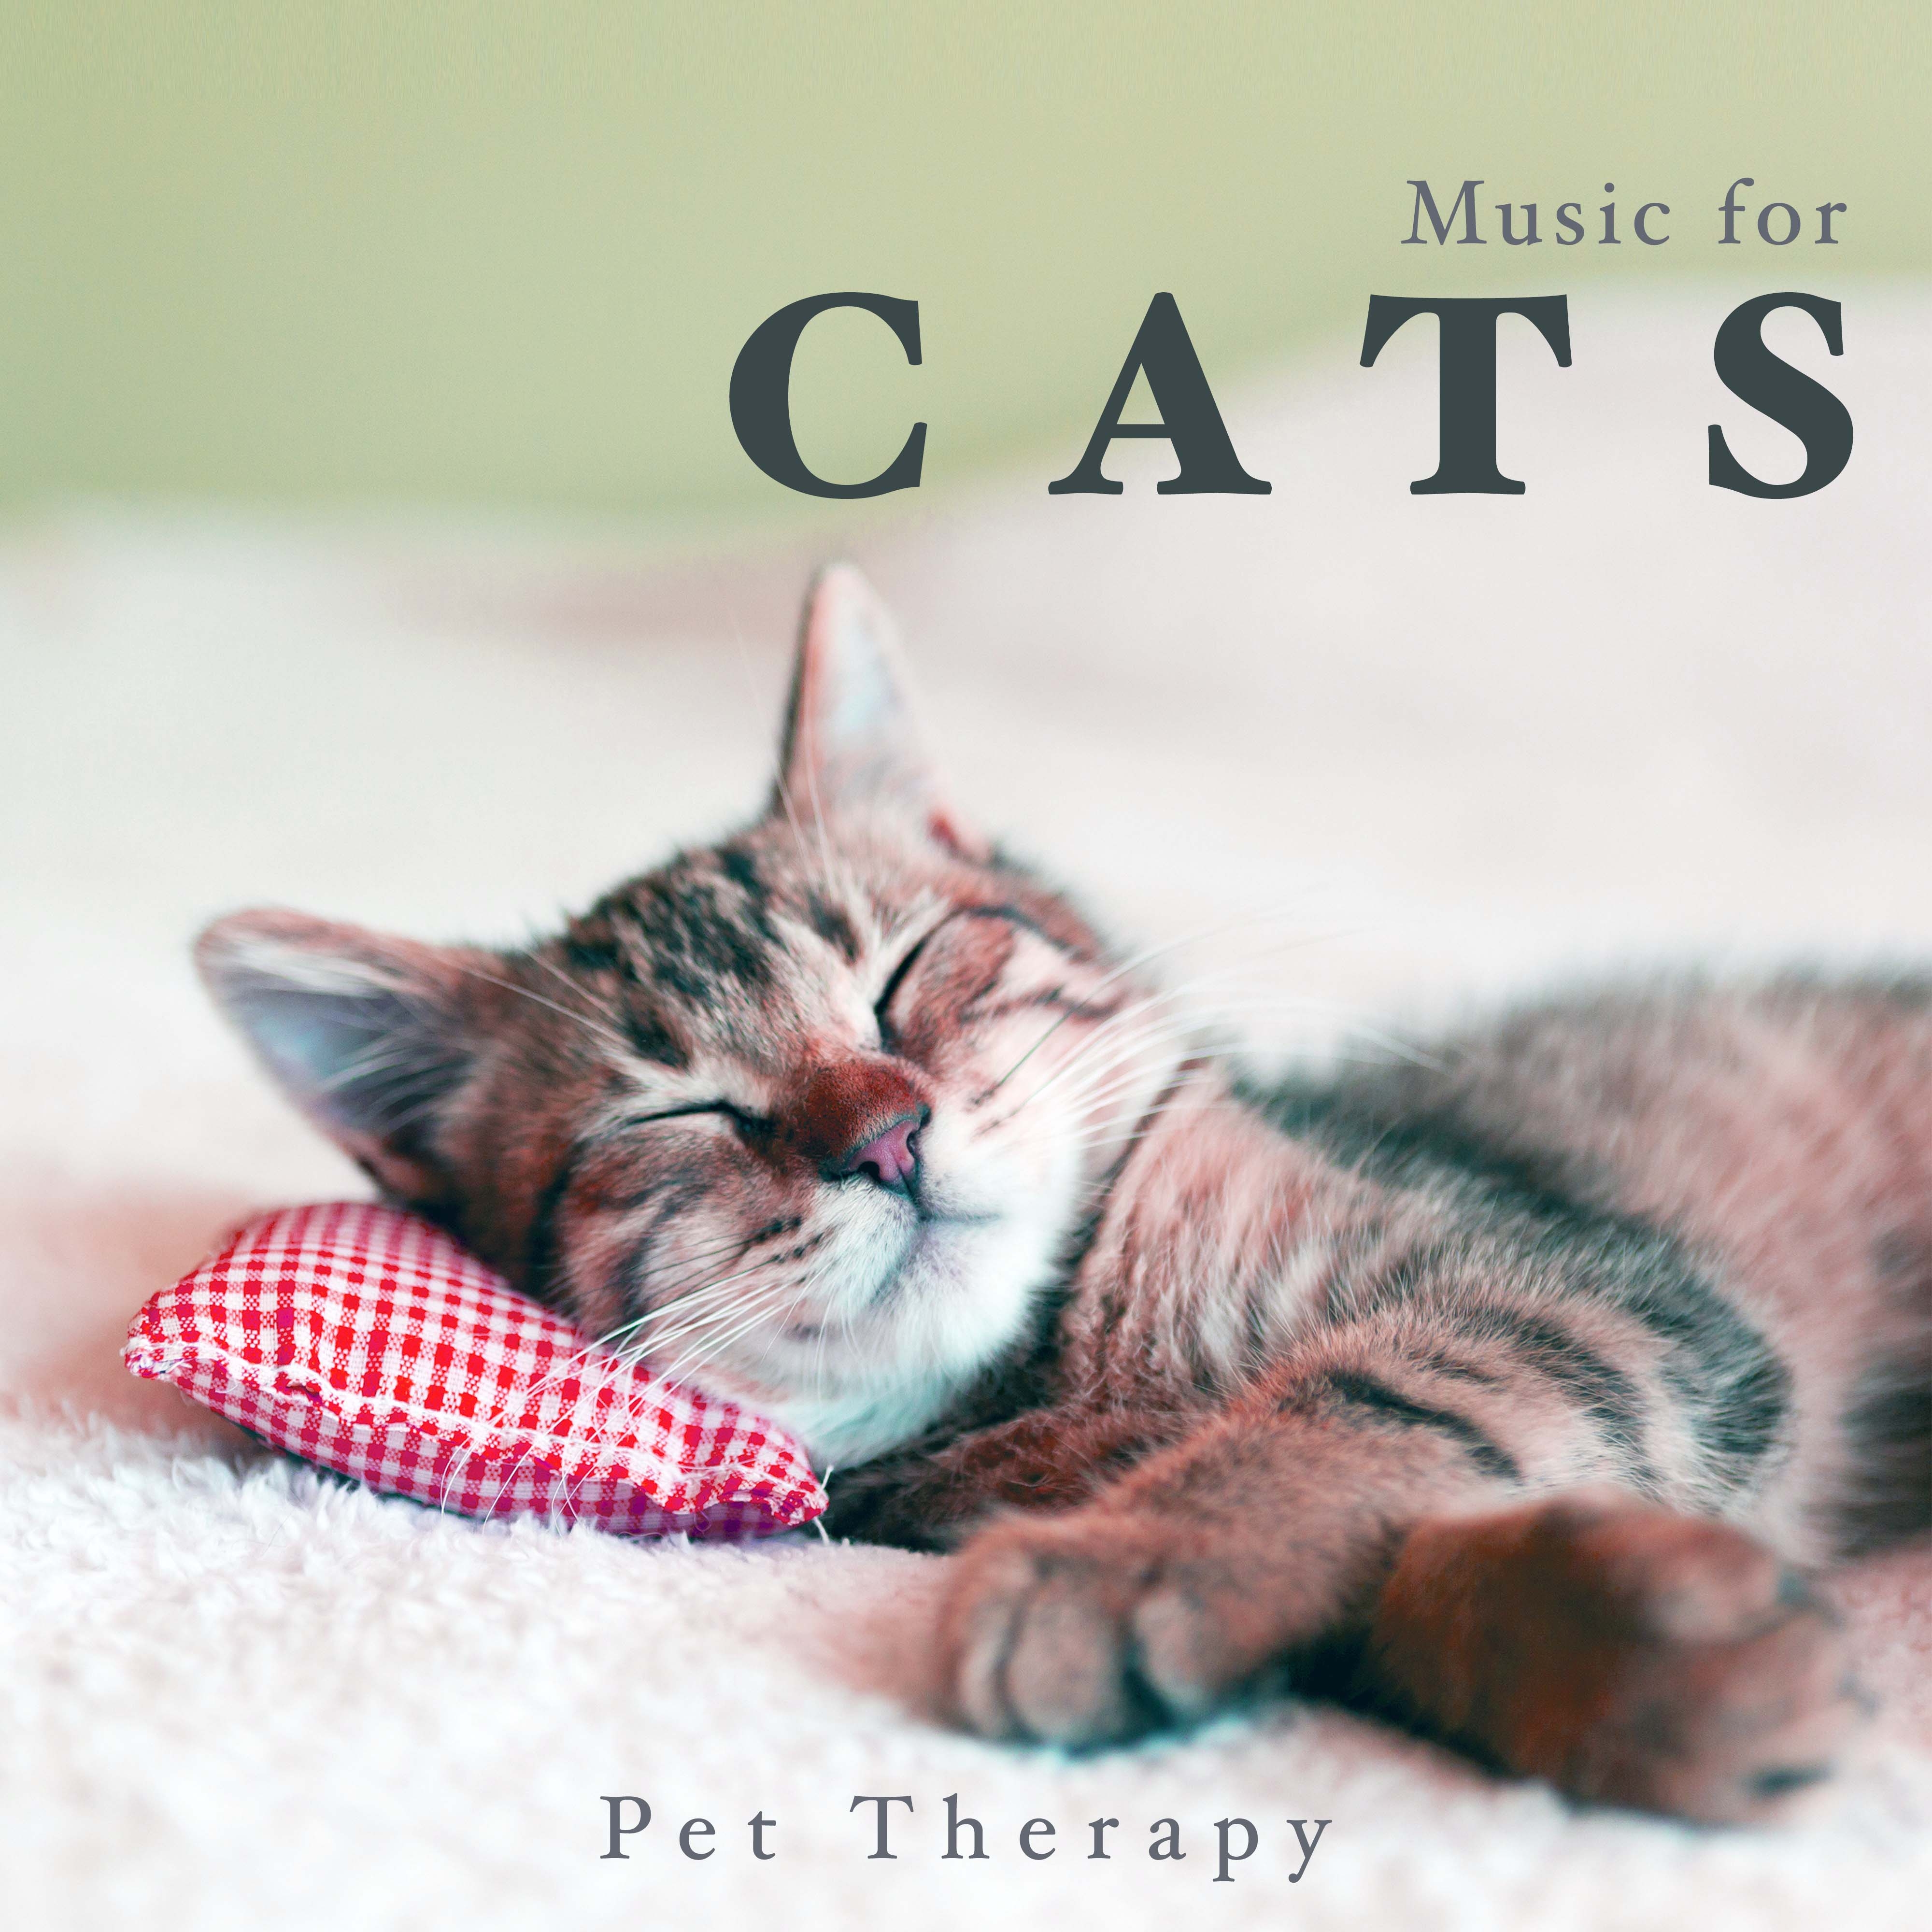 Music for Cats - Pet Therapy Relaxing Music